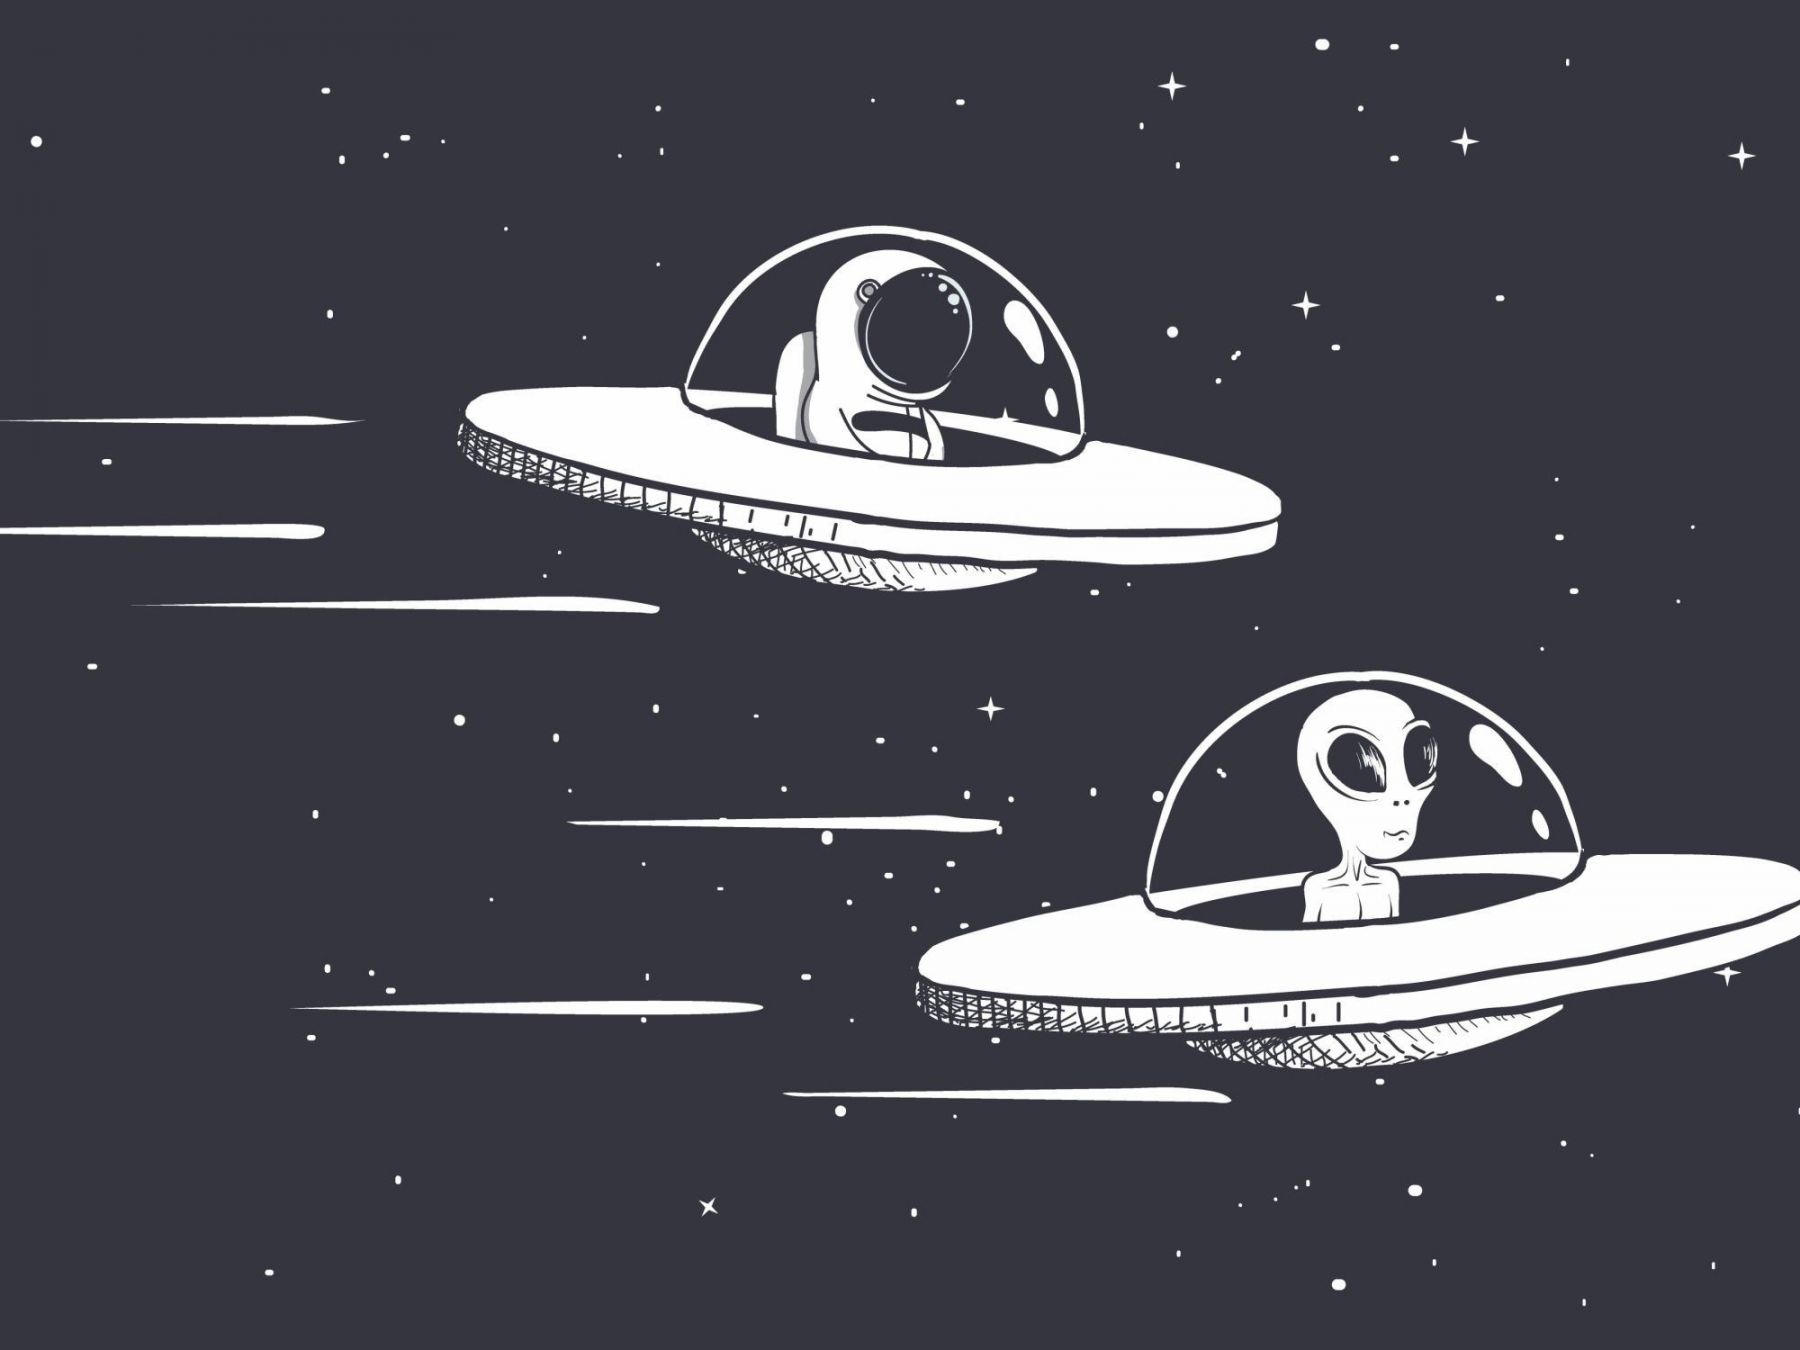 A cartoon illustration in black and white of two flying saucers in the night sky